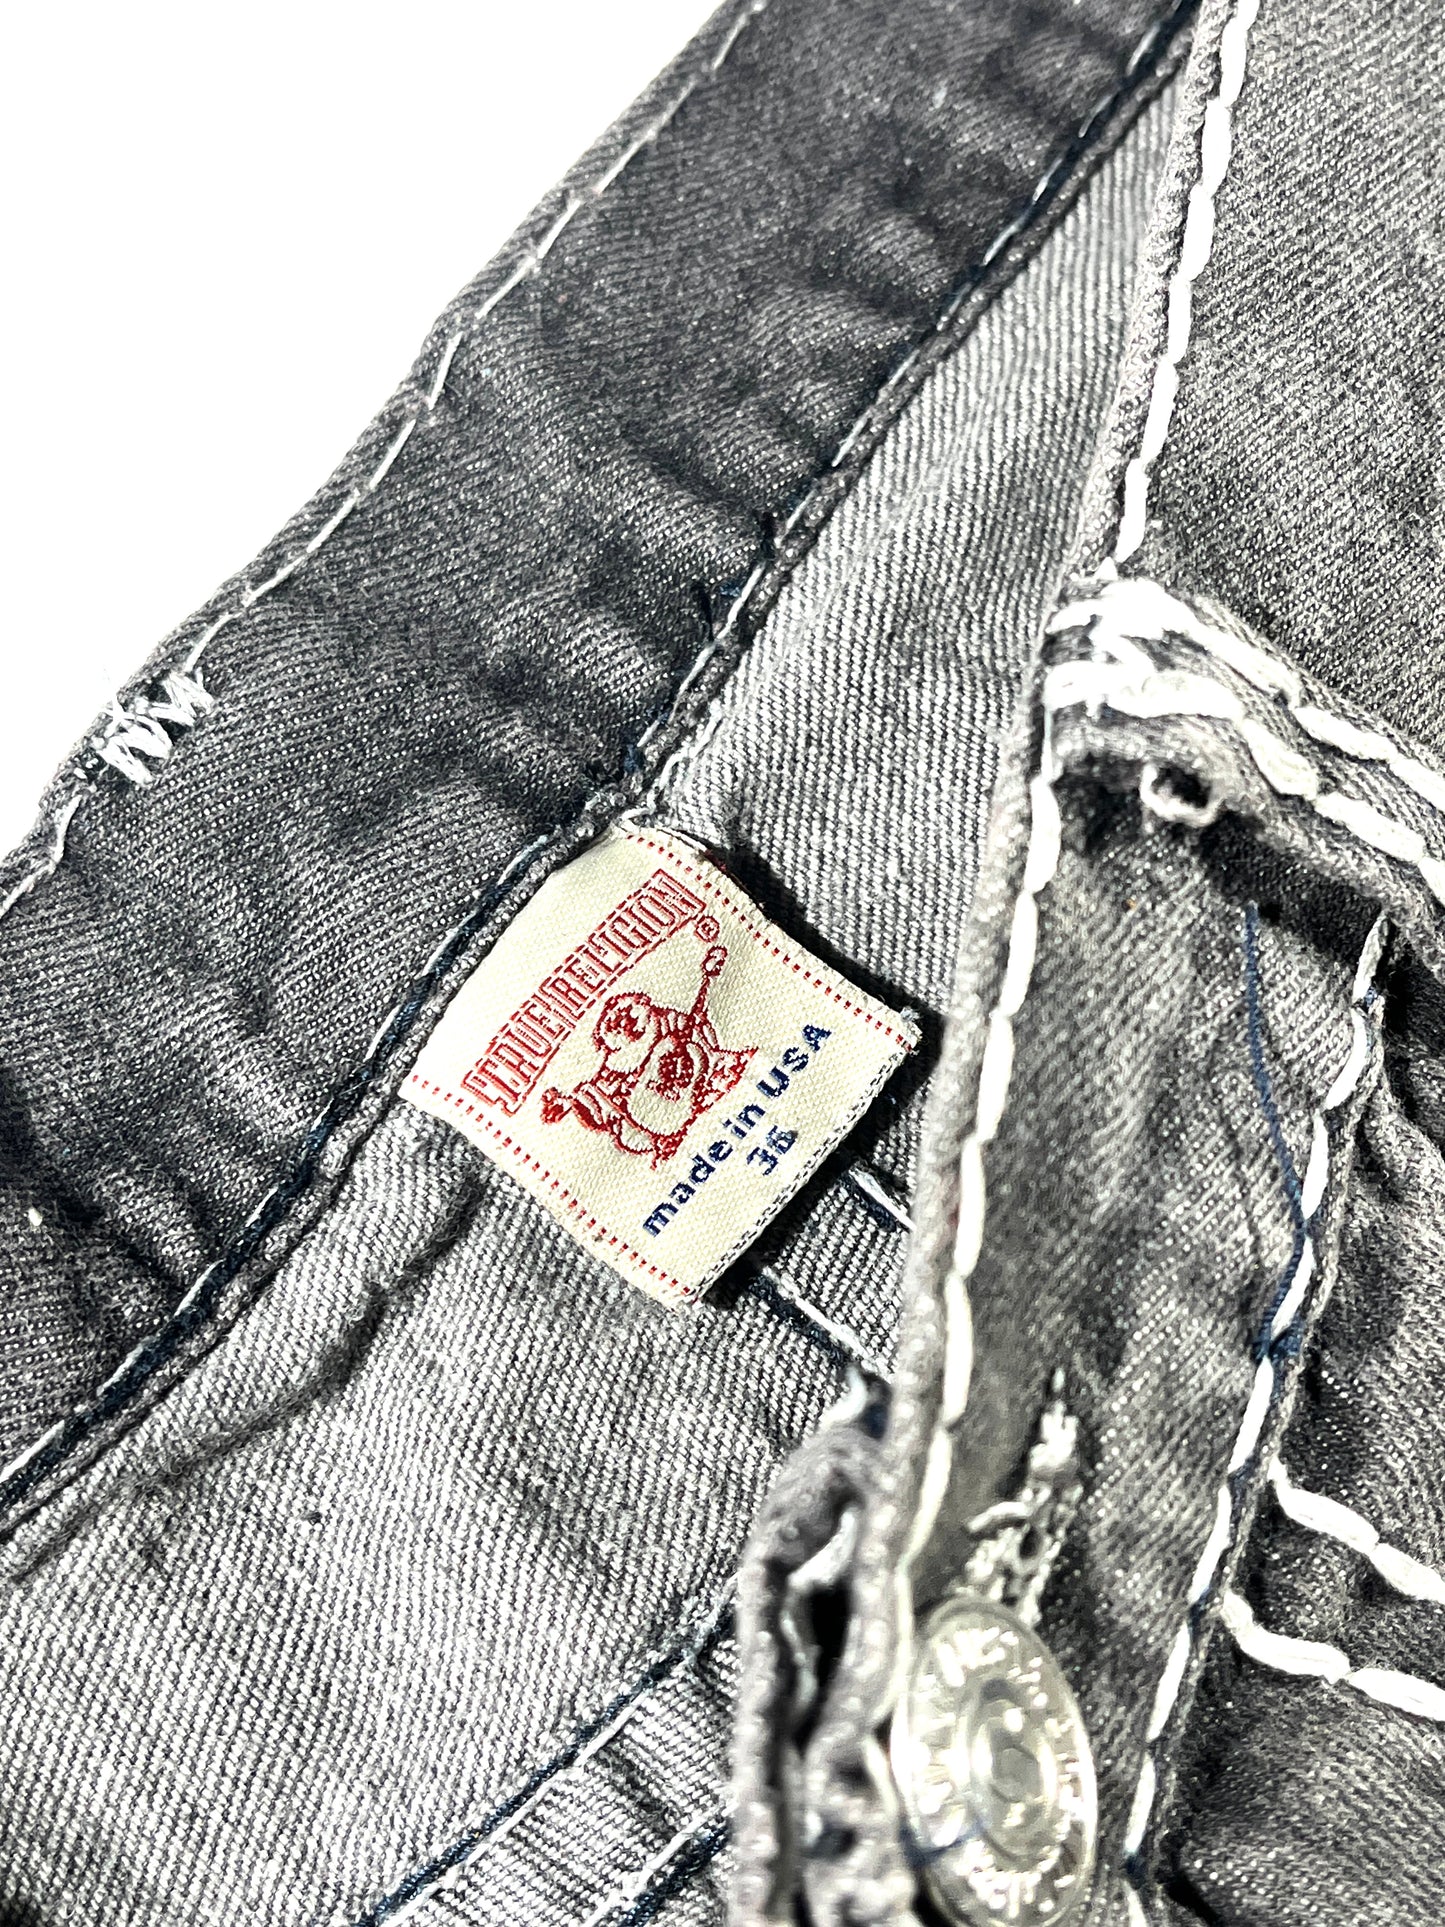 Vintage True Religion Jeans Distressed USA Made